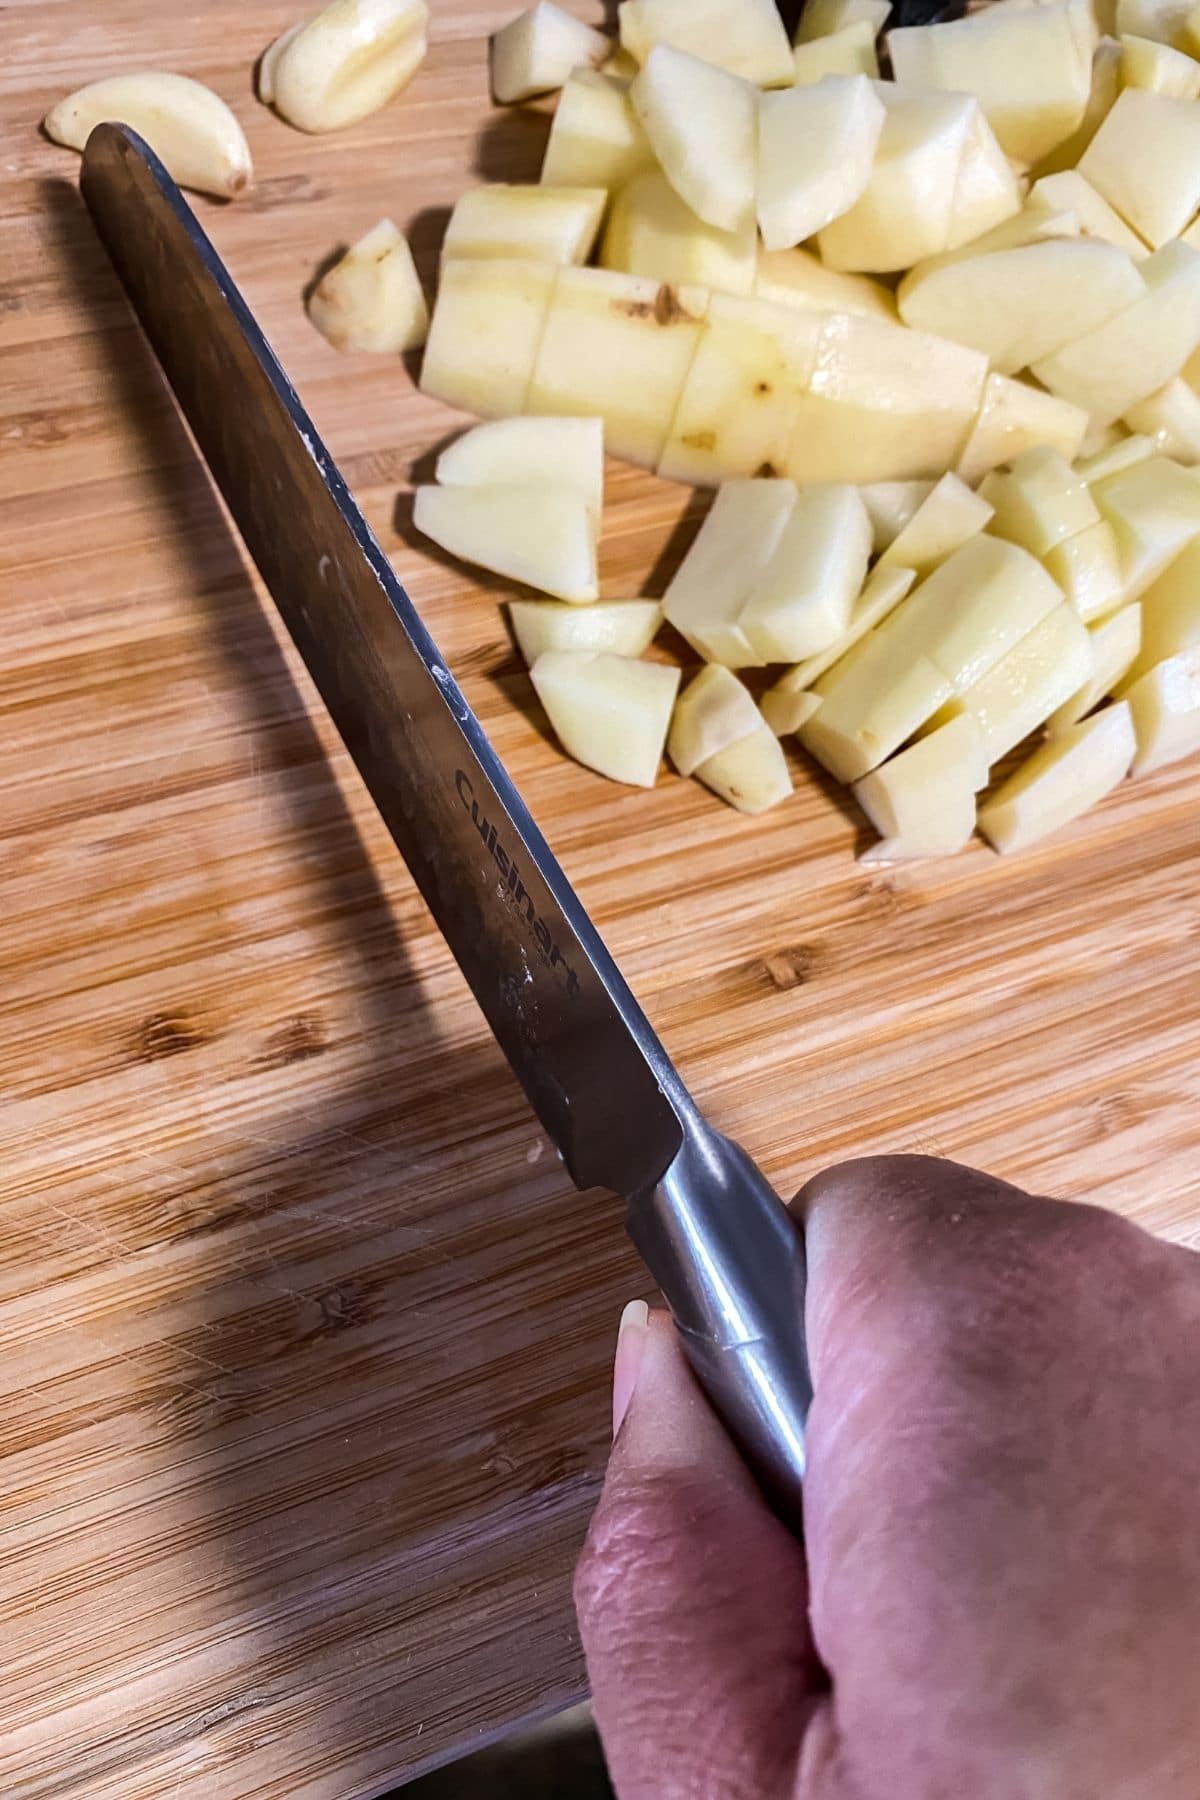 Hand holding knife cutting potatoes on wooden board